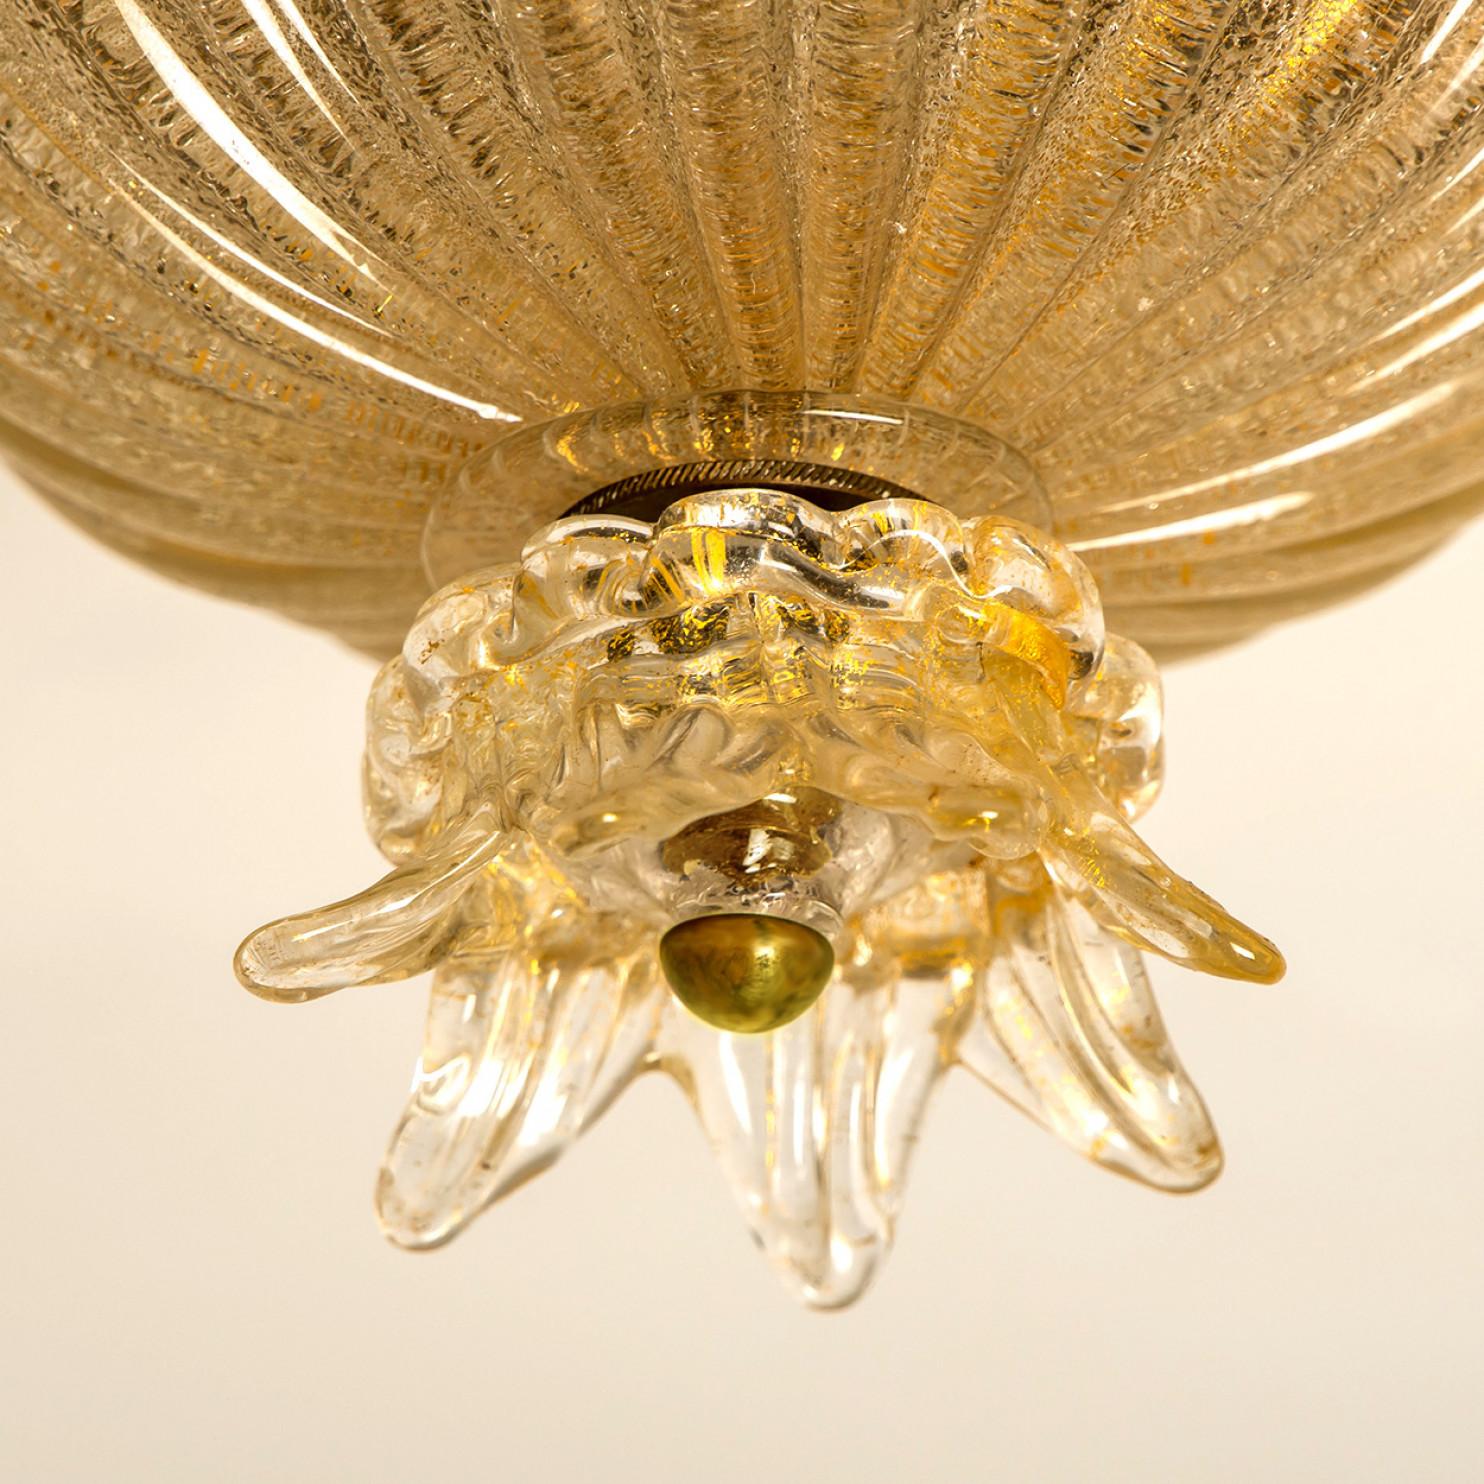 An elegant blown Murano glass flush mount by Barovier & Toso. The light fixture is made of thick Murano glass with gold details. Mounted on a white back plate. The lights refract light beautifully. The flush mount fills the room with a soft, warm